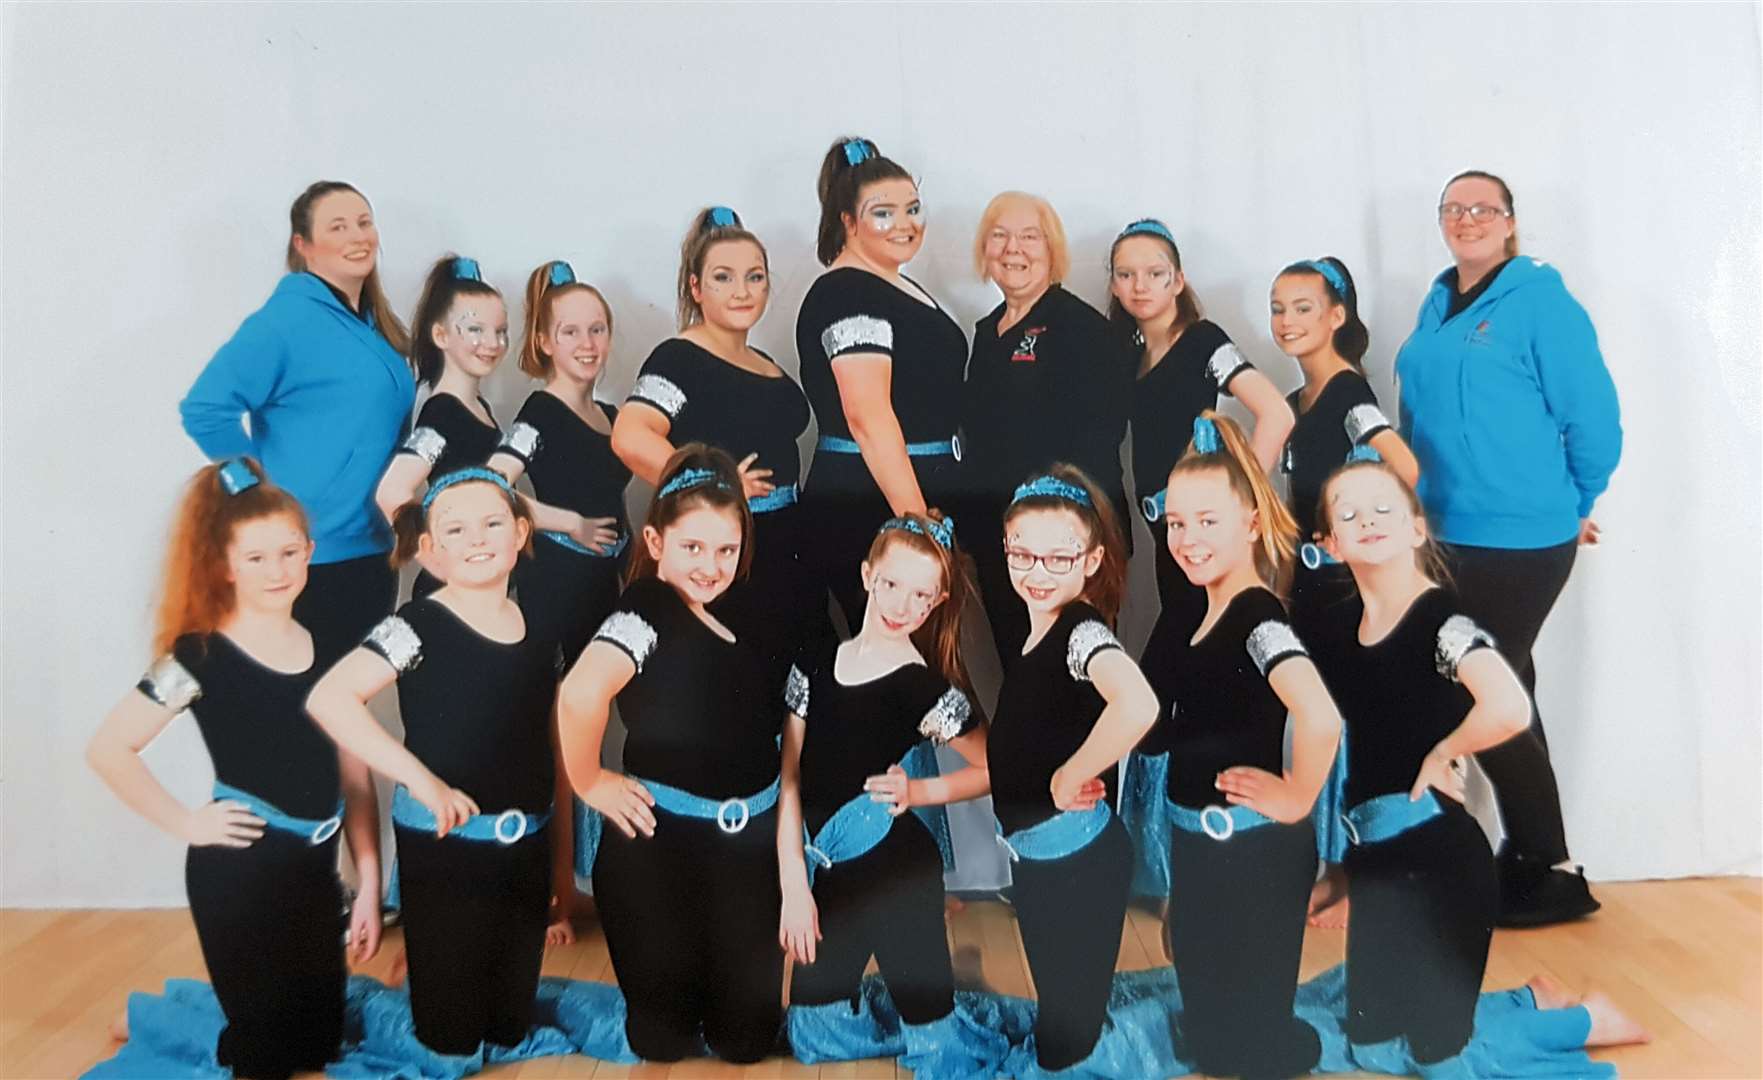 The Caithness rhythmic gymnasts group (back, from left): Sìne Hamilton, Paige McPhee, Ellie McCulloch, Sophie Armstrong, Megan Wright, Diane Gibson, Amy Sewell, Amber Sinclair and Alana McPhee, and (front, from left) Bethan Wood, Zara Smith, Angelina Bain, Brooke McAlpine, Hannah McColm, Mazie McCulloch and Carys Gunn.